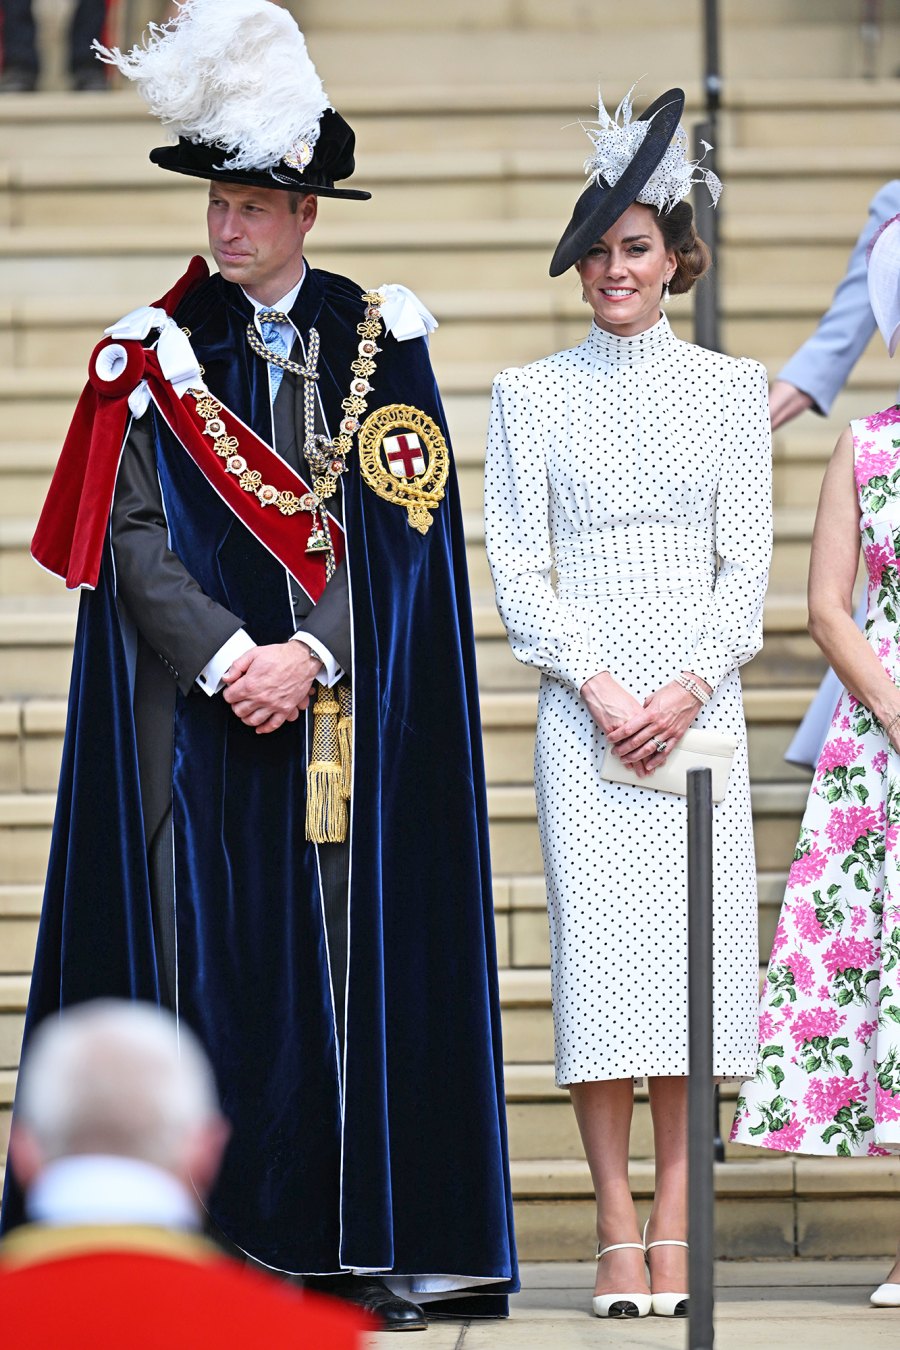 Princess Kate Looks Radiant in White While Attending the Order of the Garter Service